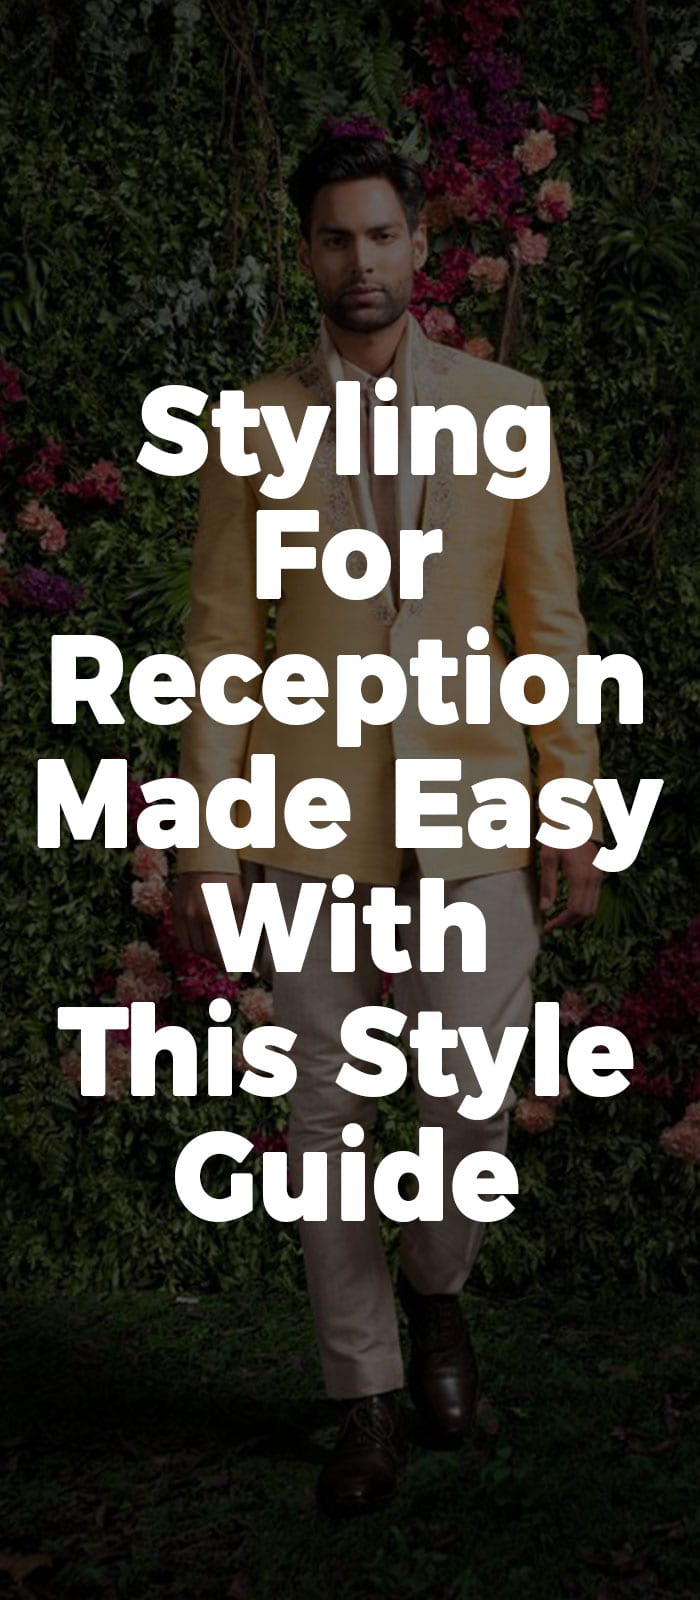 Styling For Reception Made Easy With This Style Guide